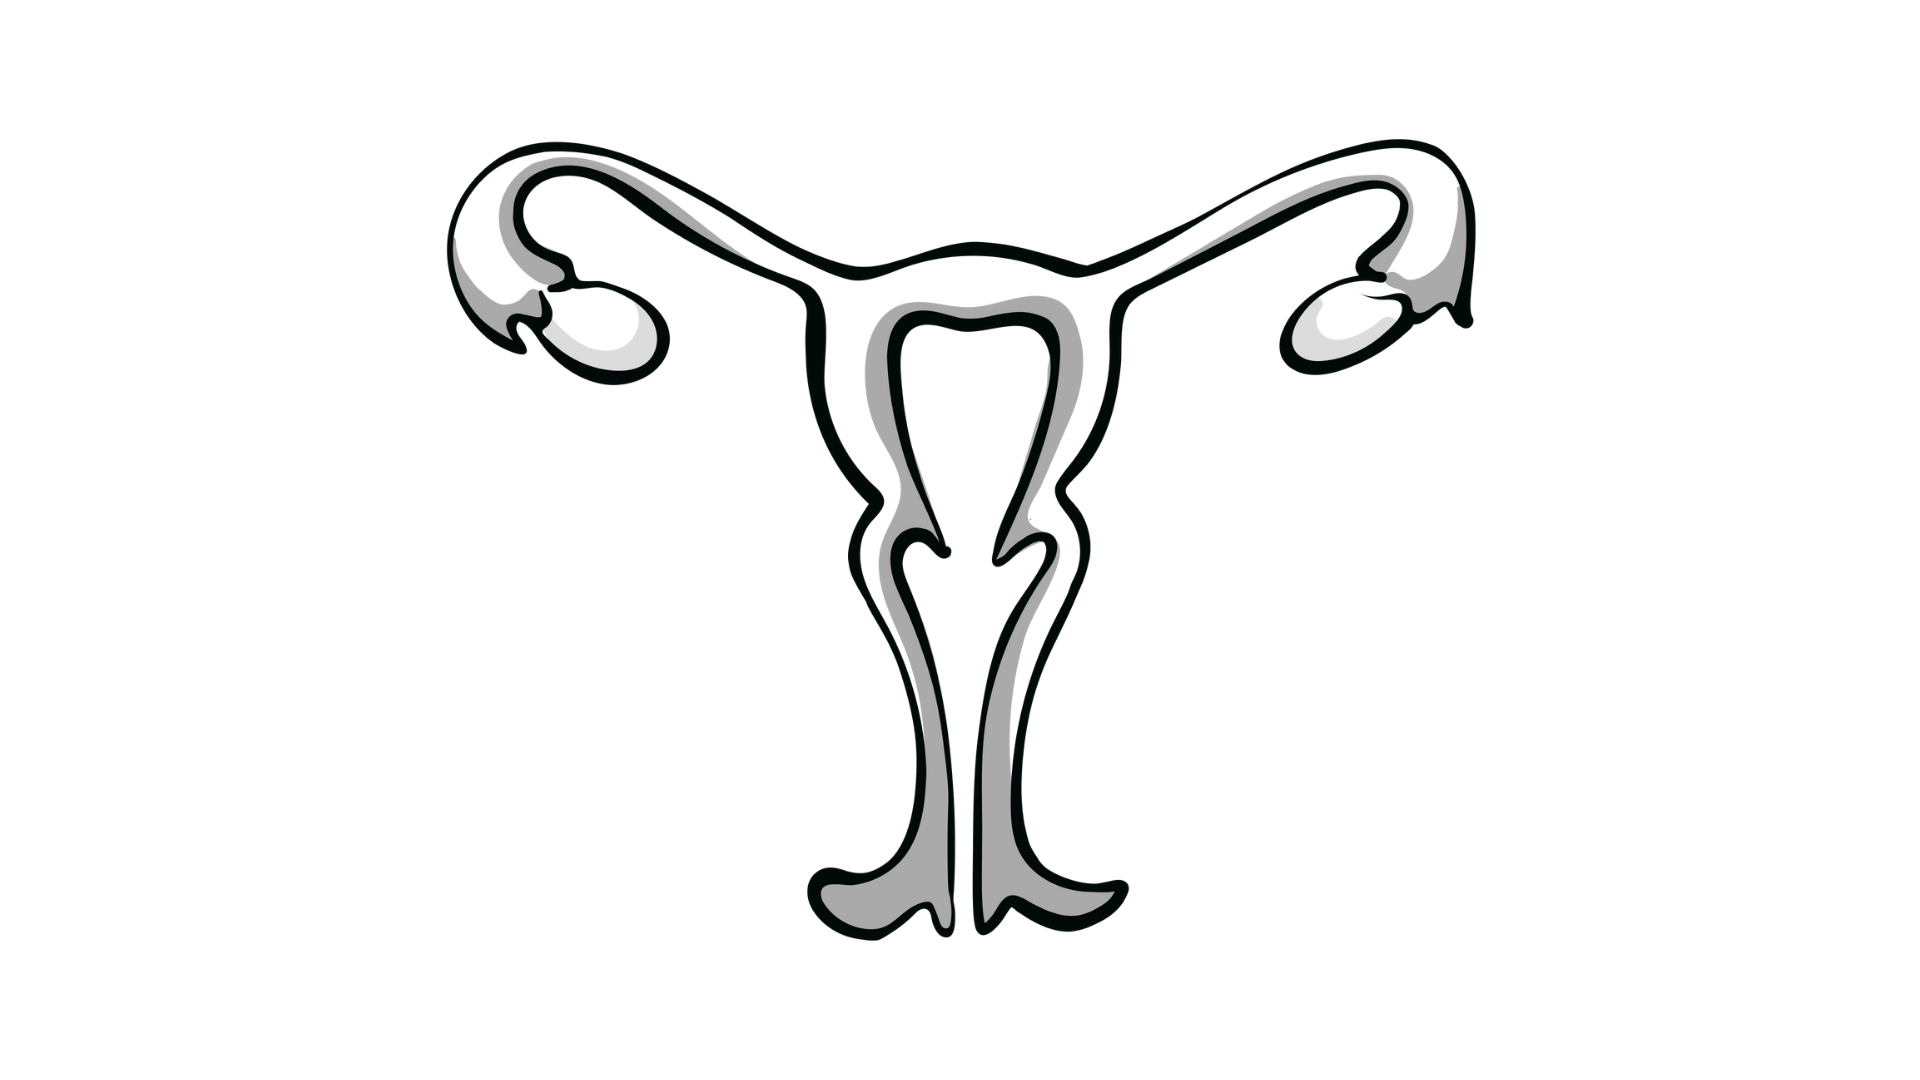 Sketch of female reproductive system